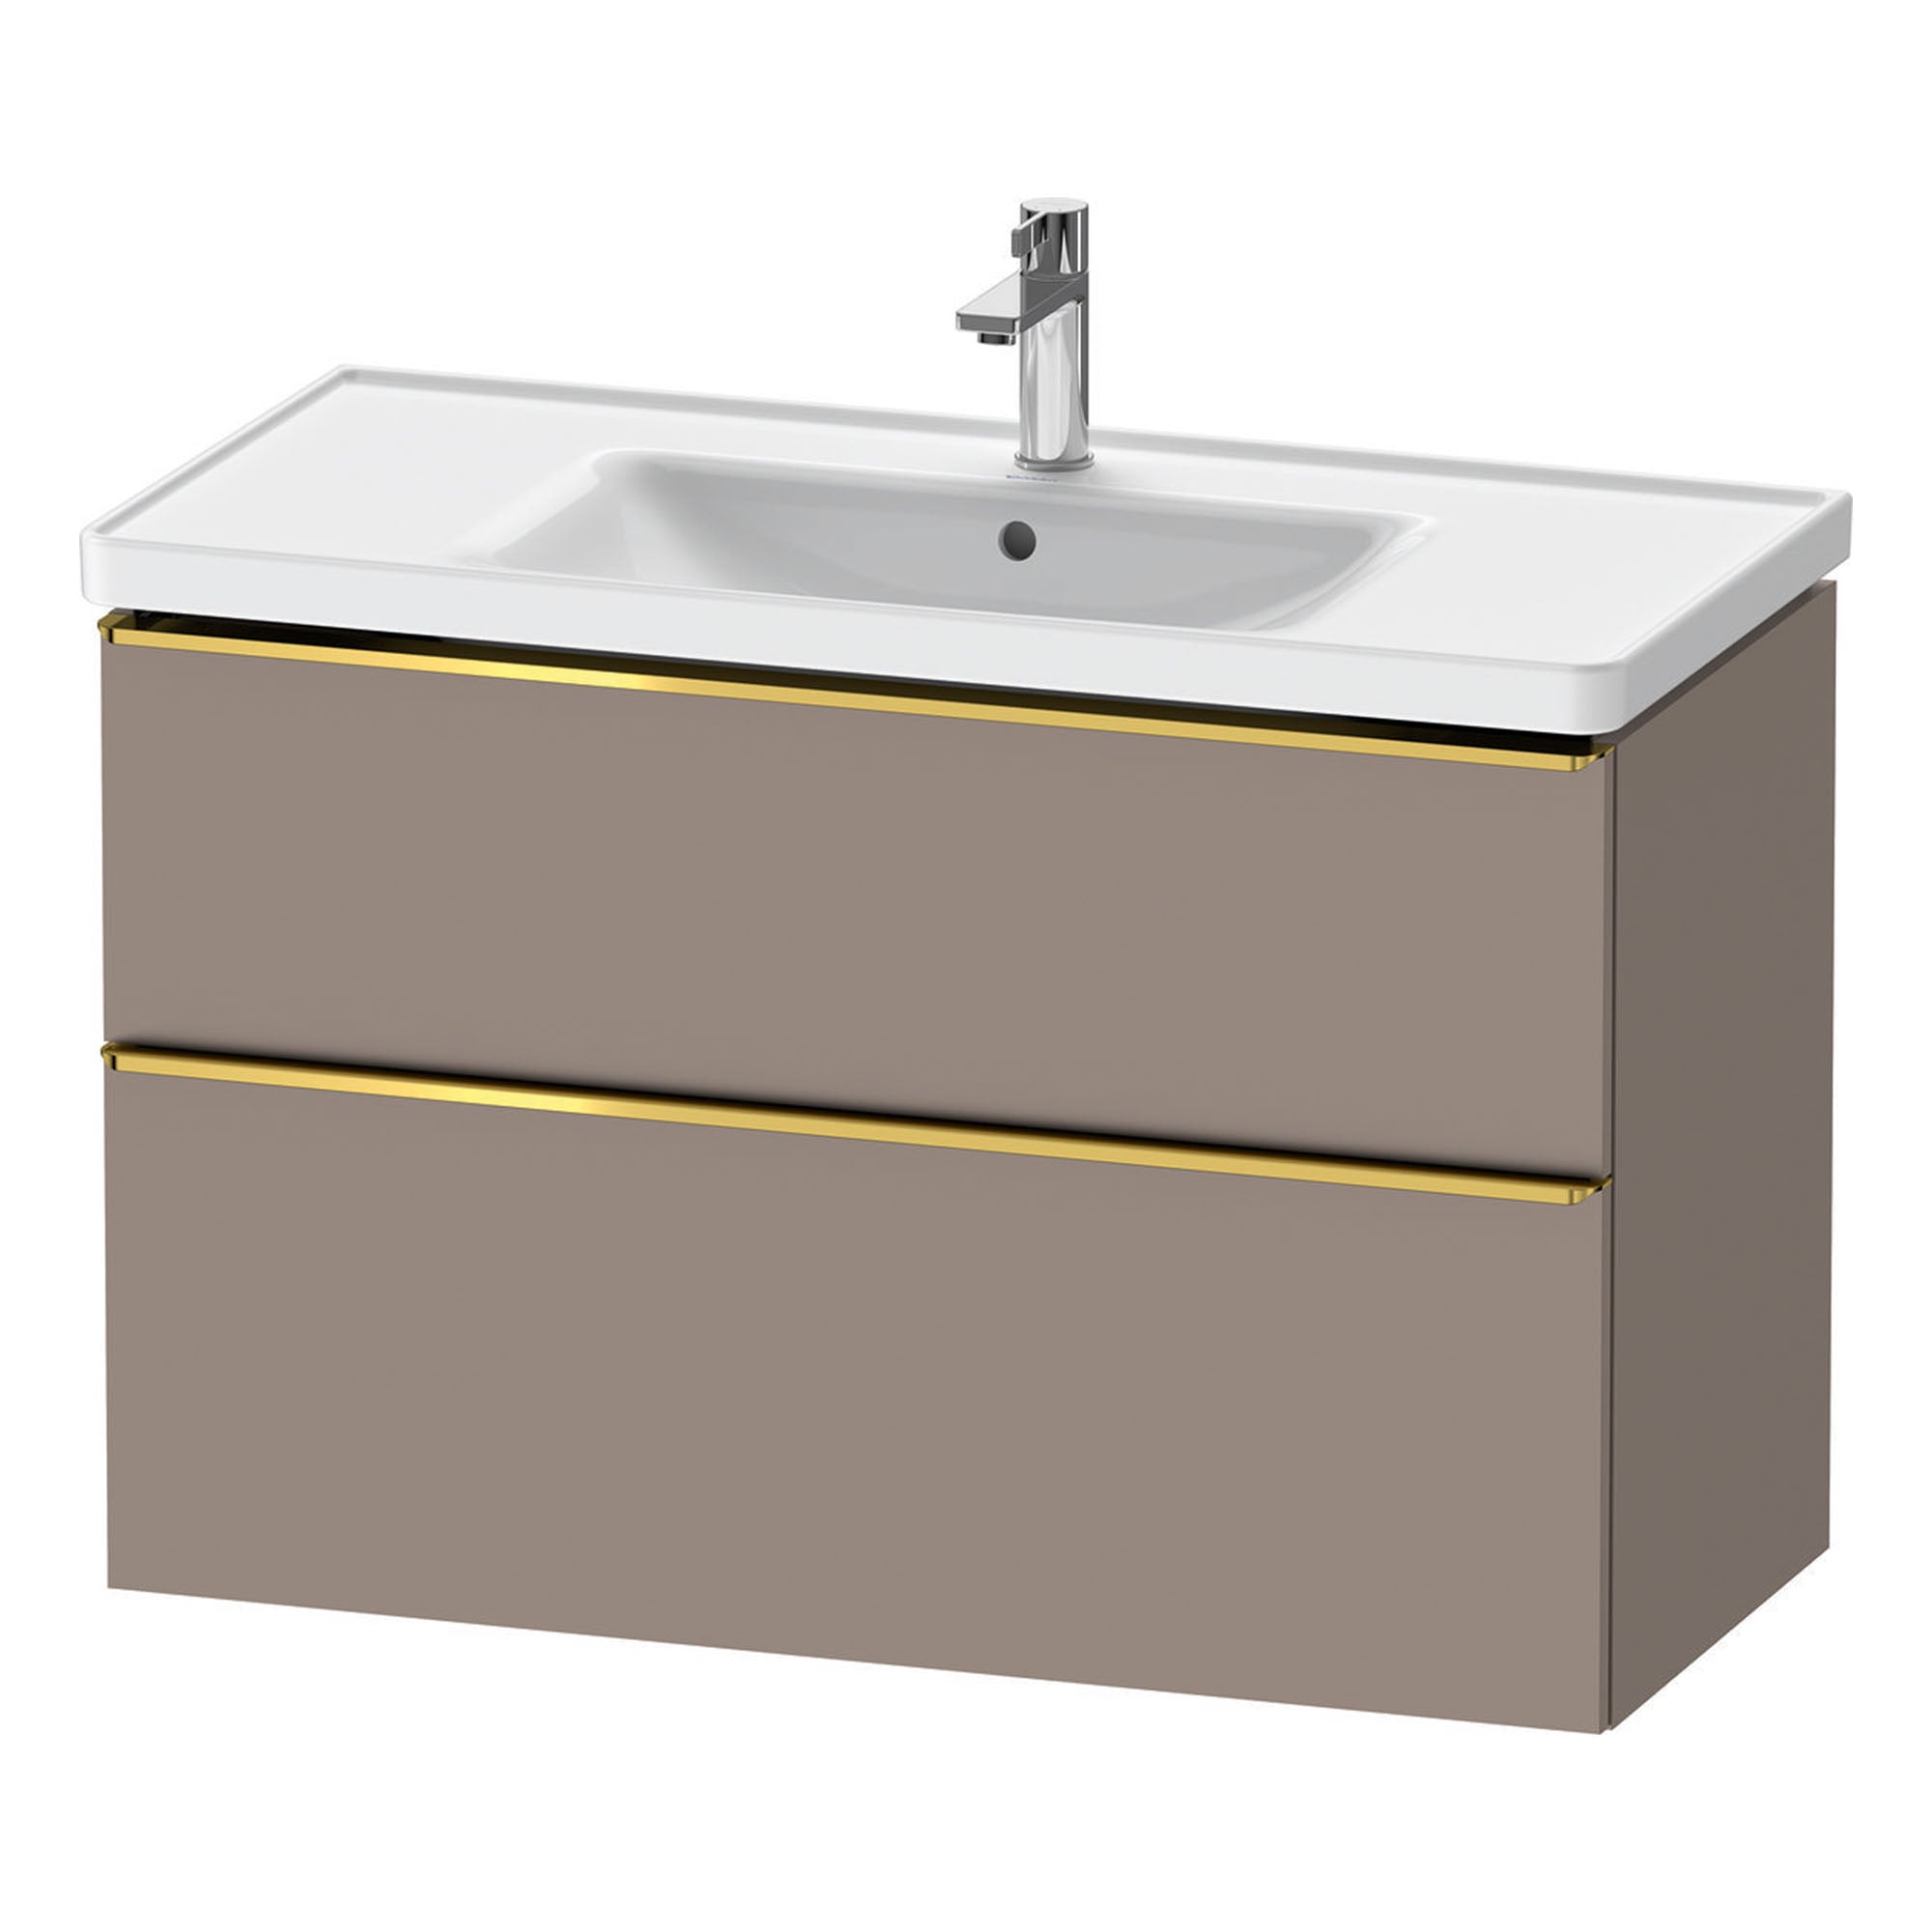 duravit d-neo 1000mm wall mounted vanity unit with d-neo basin basalt gold handles